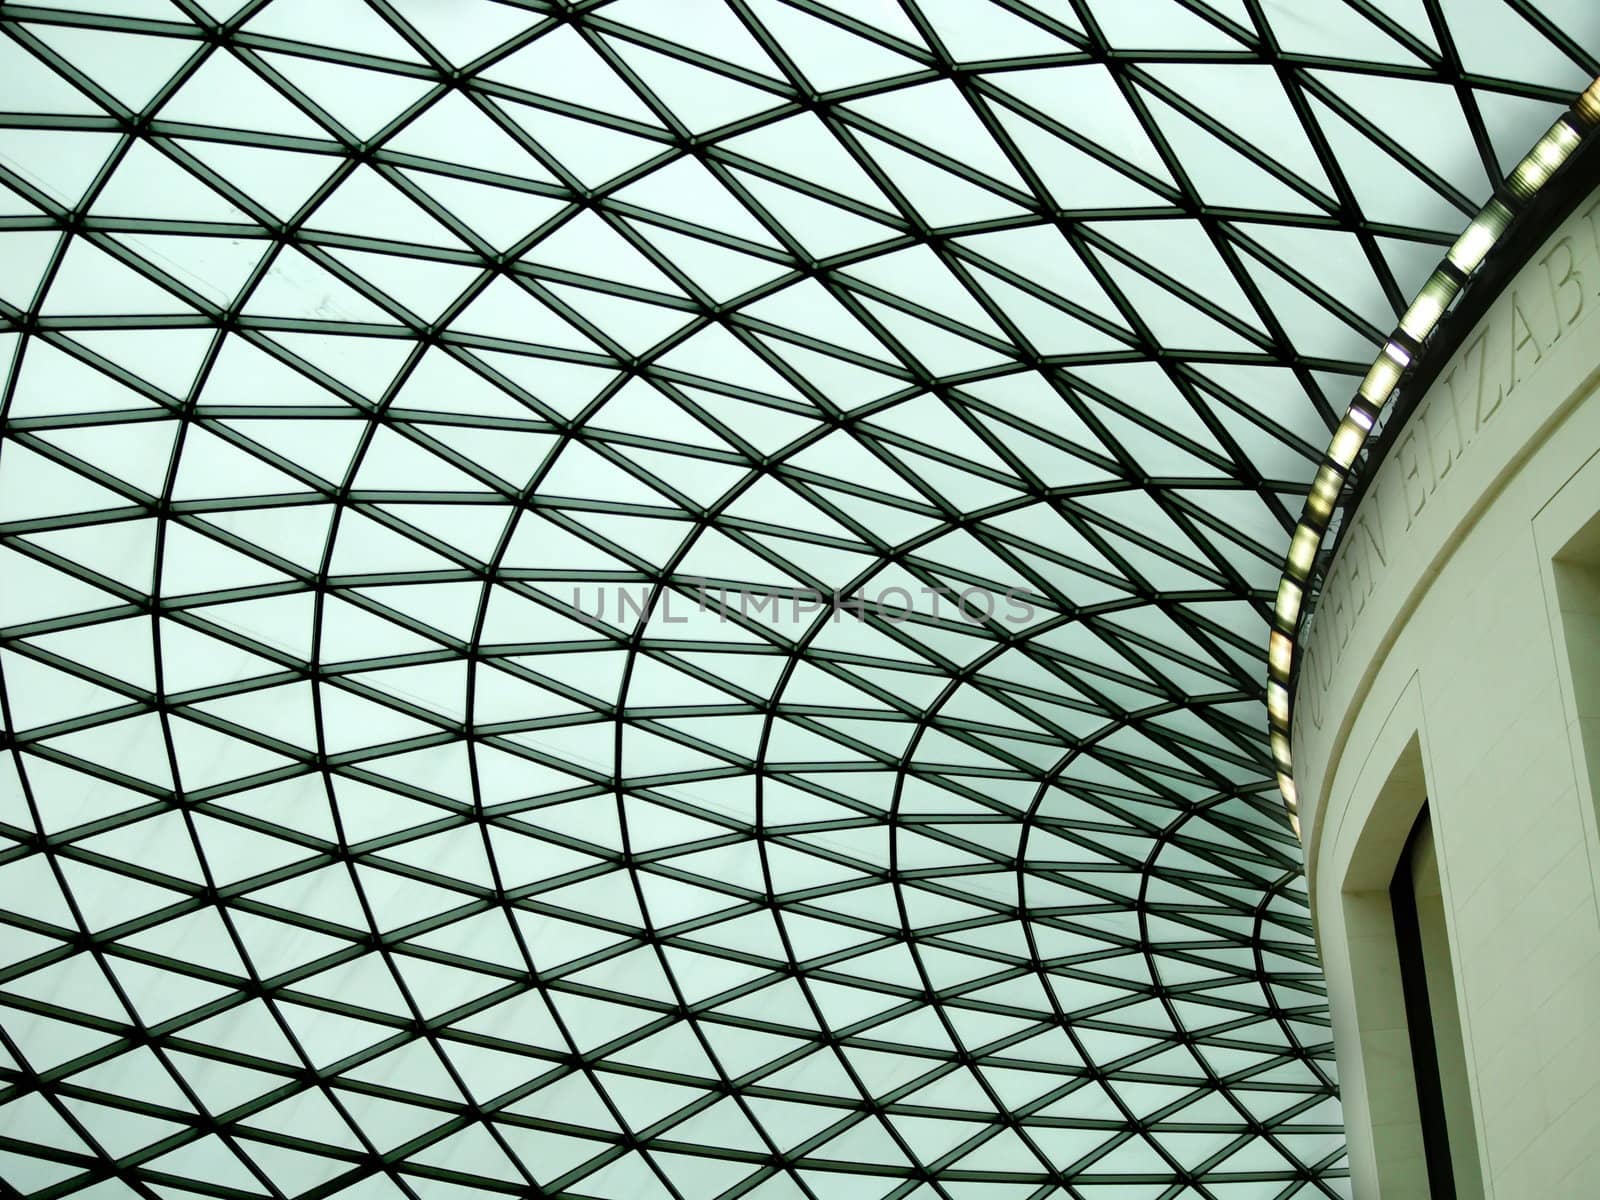 LONDON - MARCH 19:  British Museum on march 19. 2010 in London. The British Museum was established in 1753, largely based on the collections of the physician and scientist Sir Hans Sloane. The museum first opened to the public on 15 January 1759